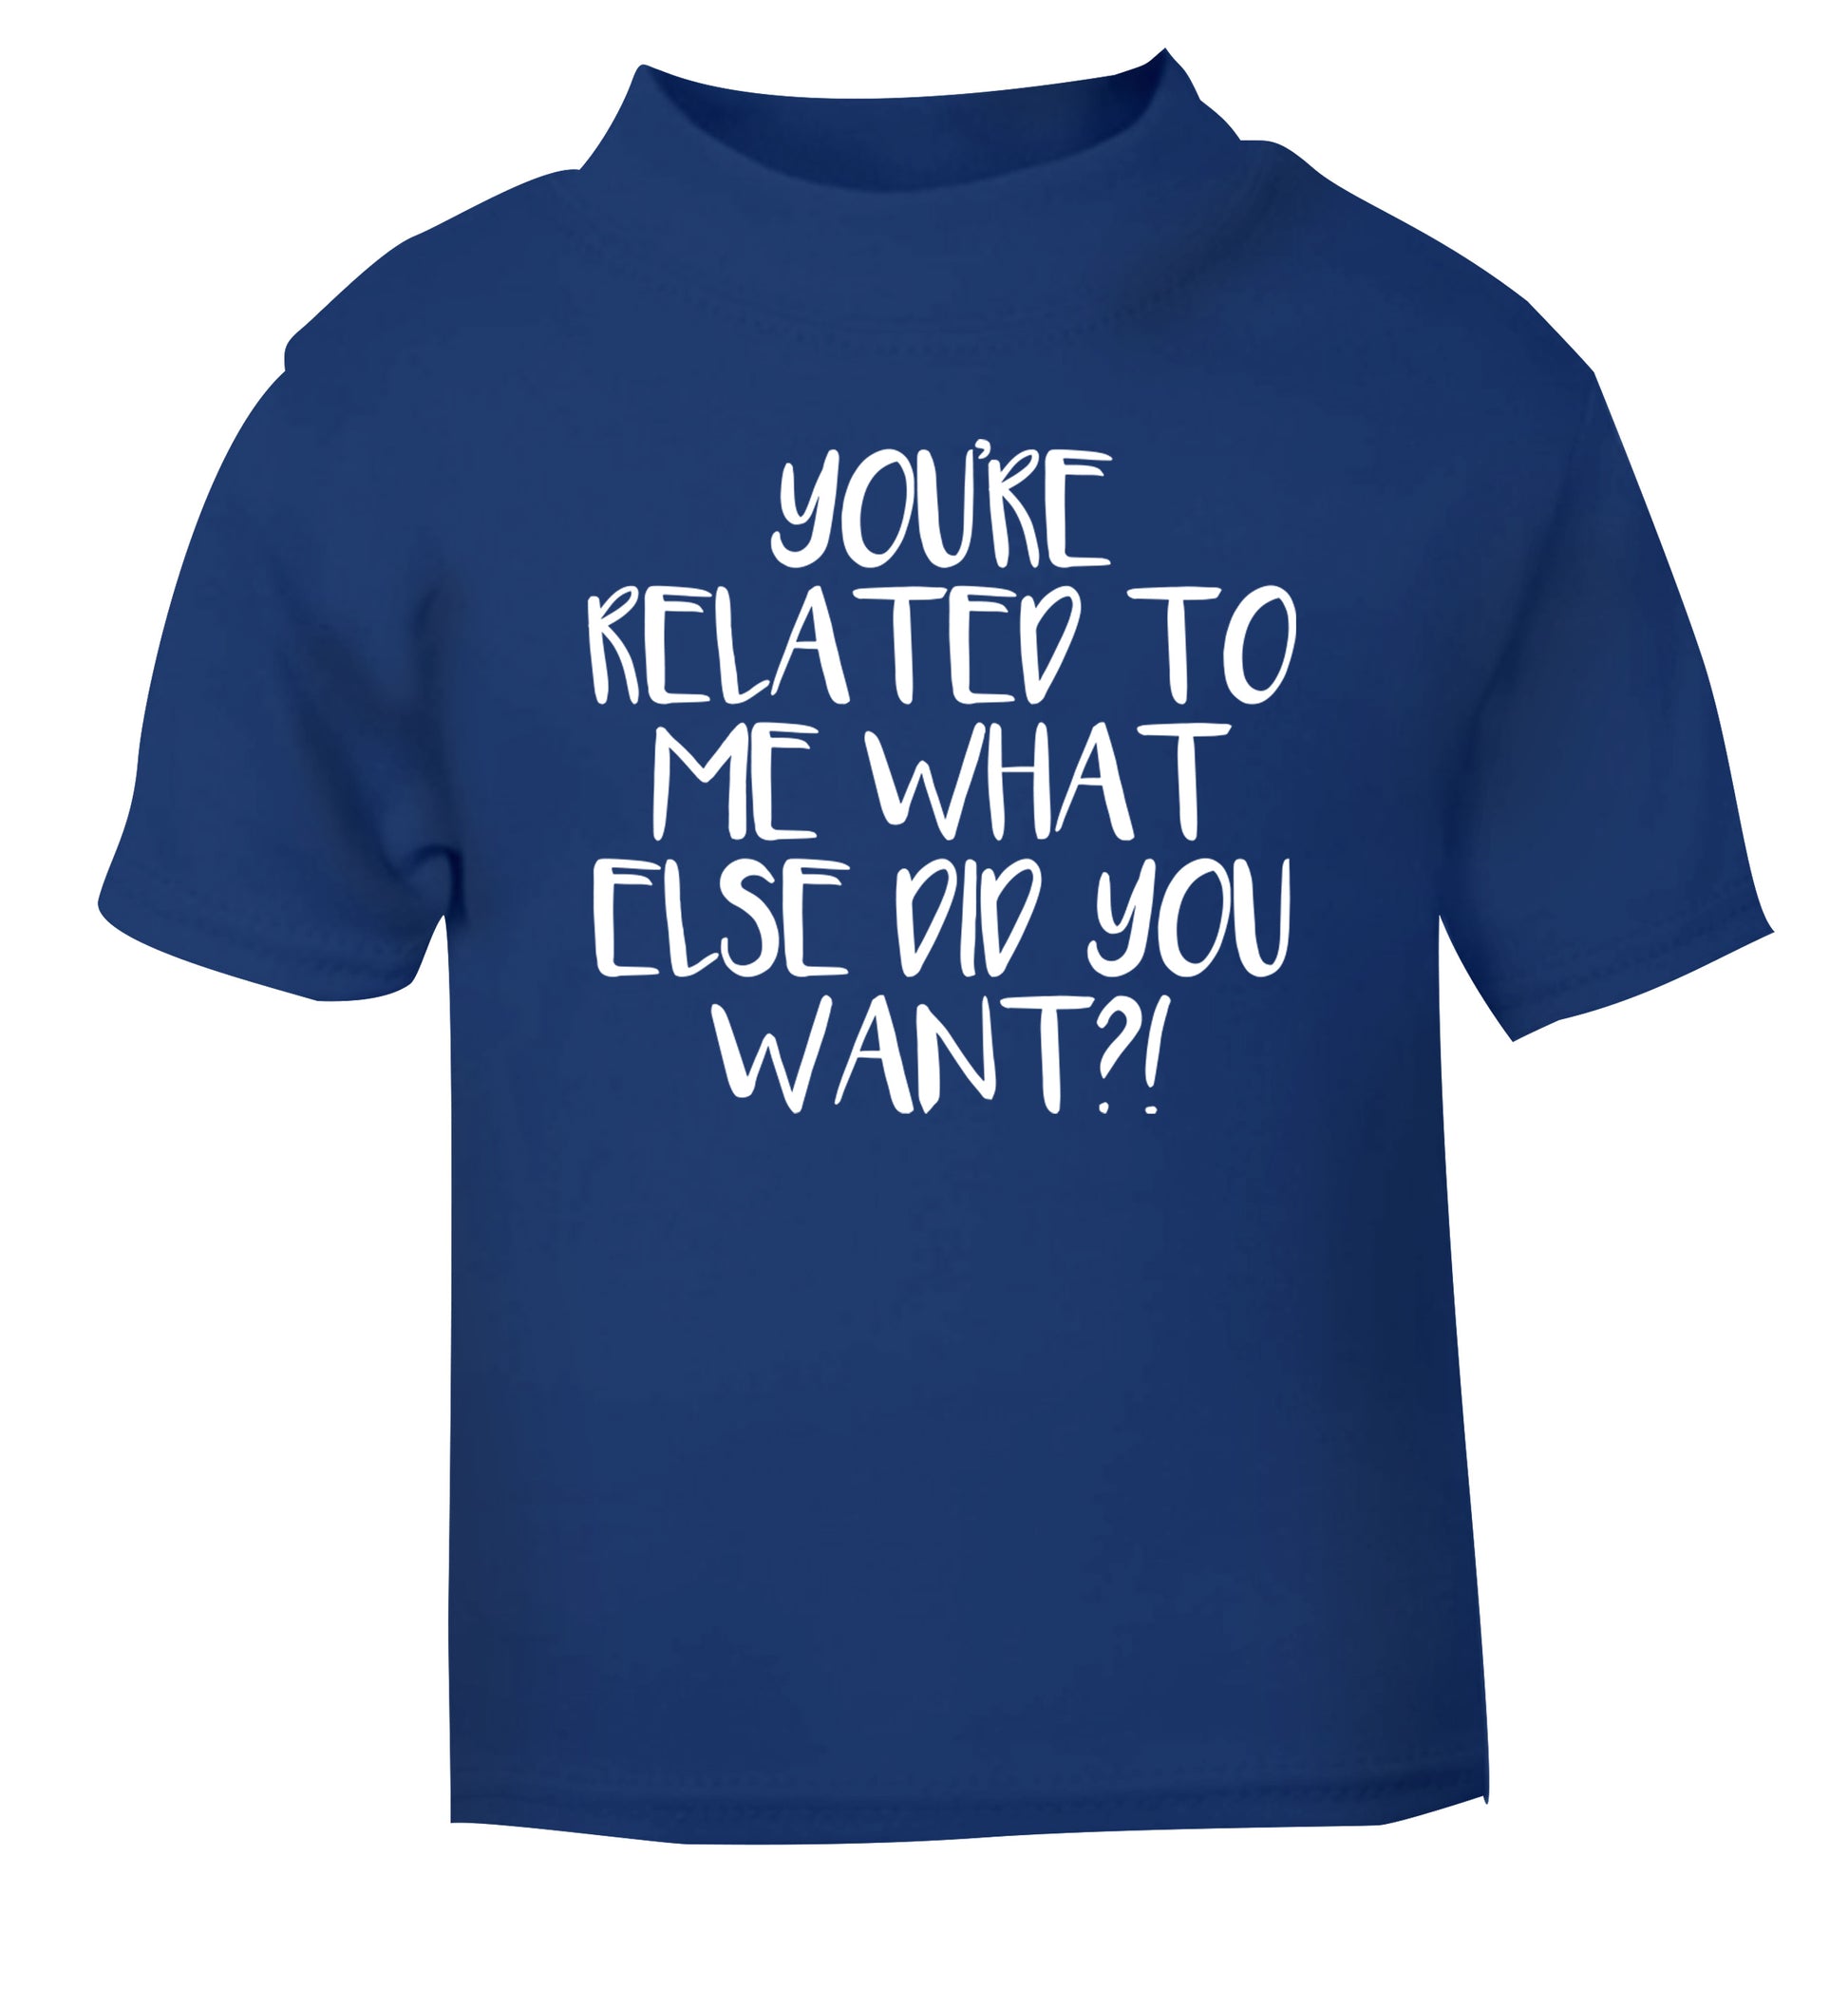 You're related to me what more do you want? blue Baby Toddler Tshirt 2 Years